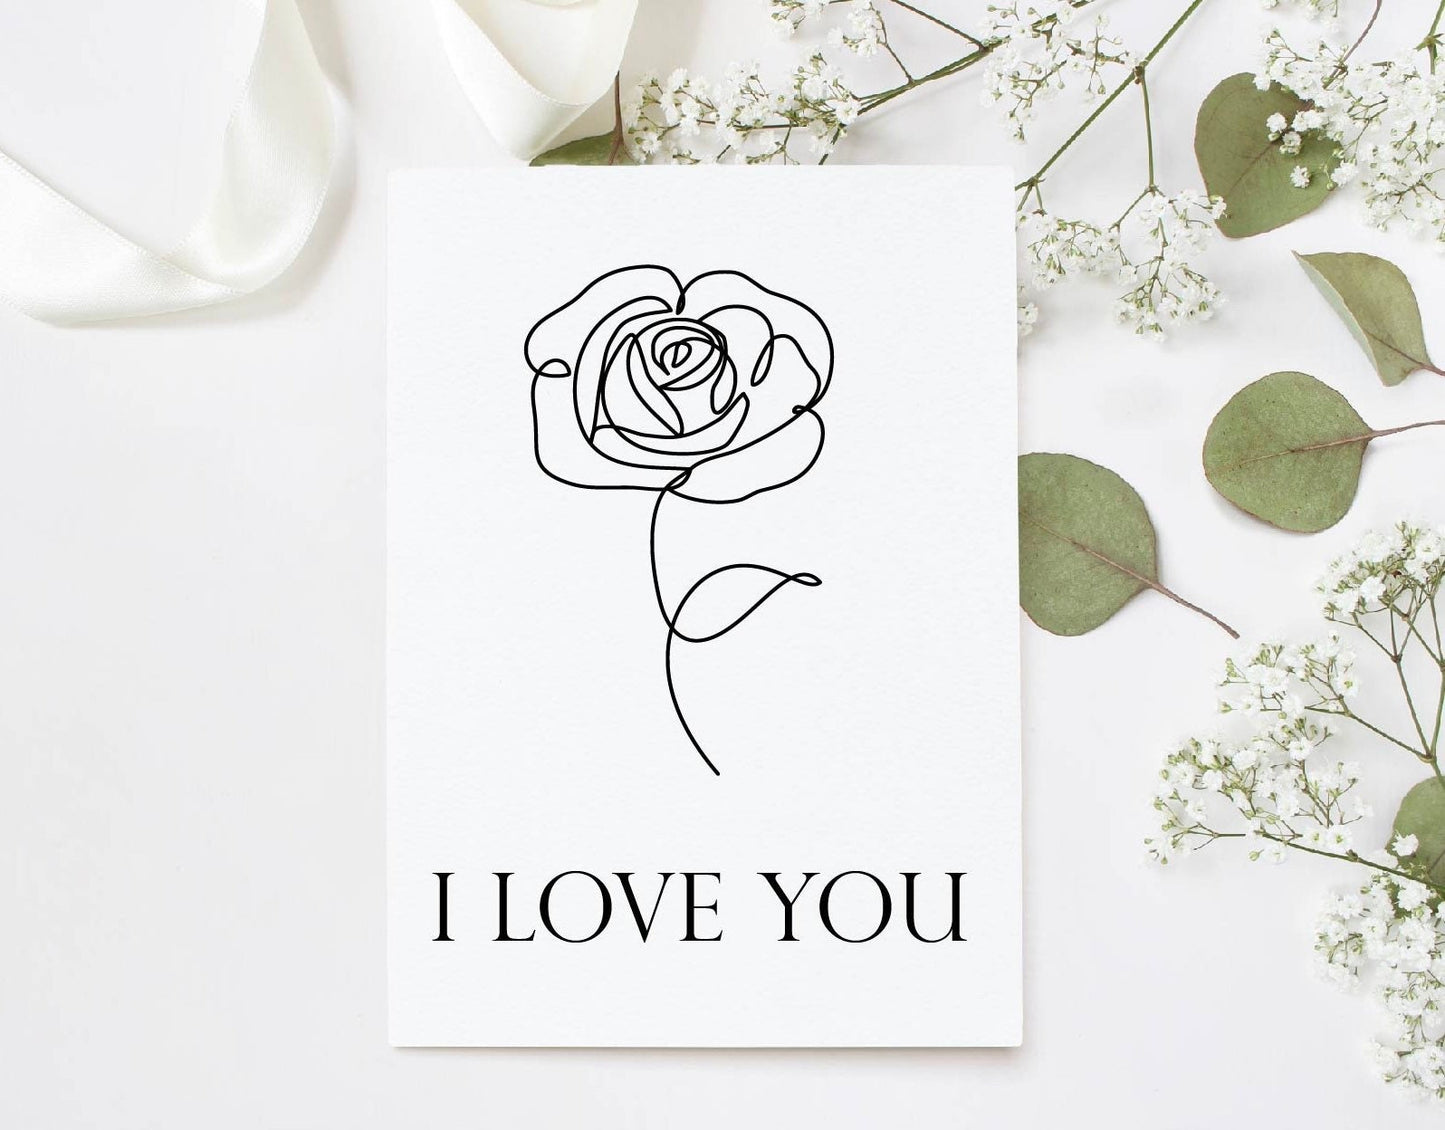 I love you card, Valentine’s Day card, anniversary card, card for boyfriend, girlfriend, wife card, husband card, fiance on valentines.